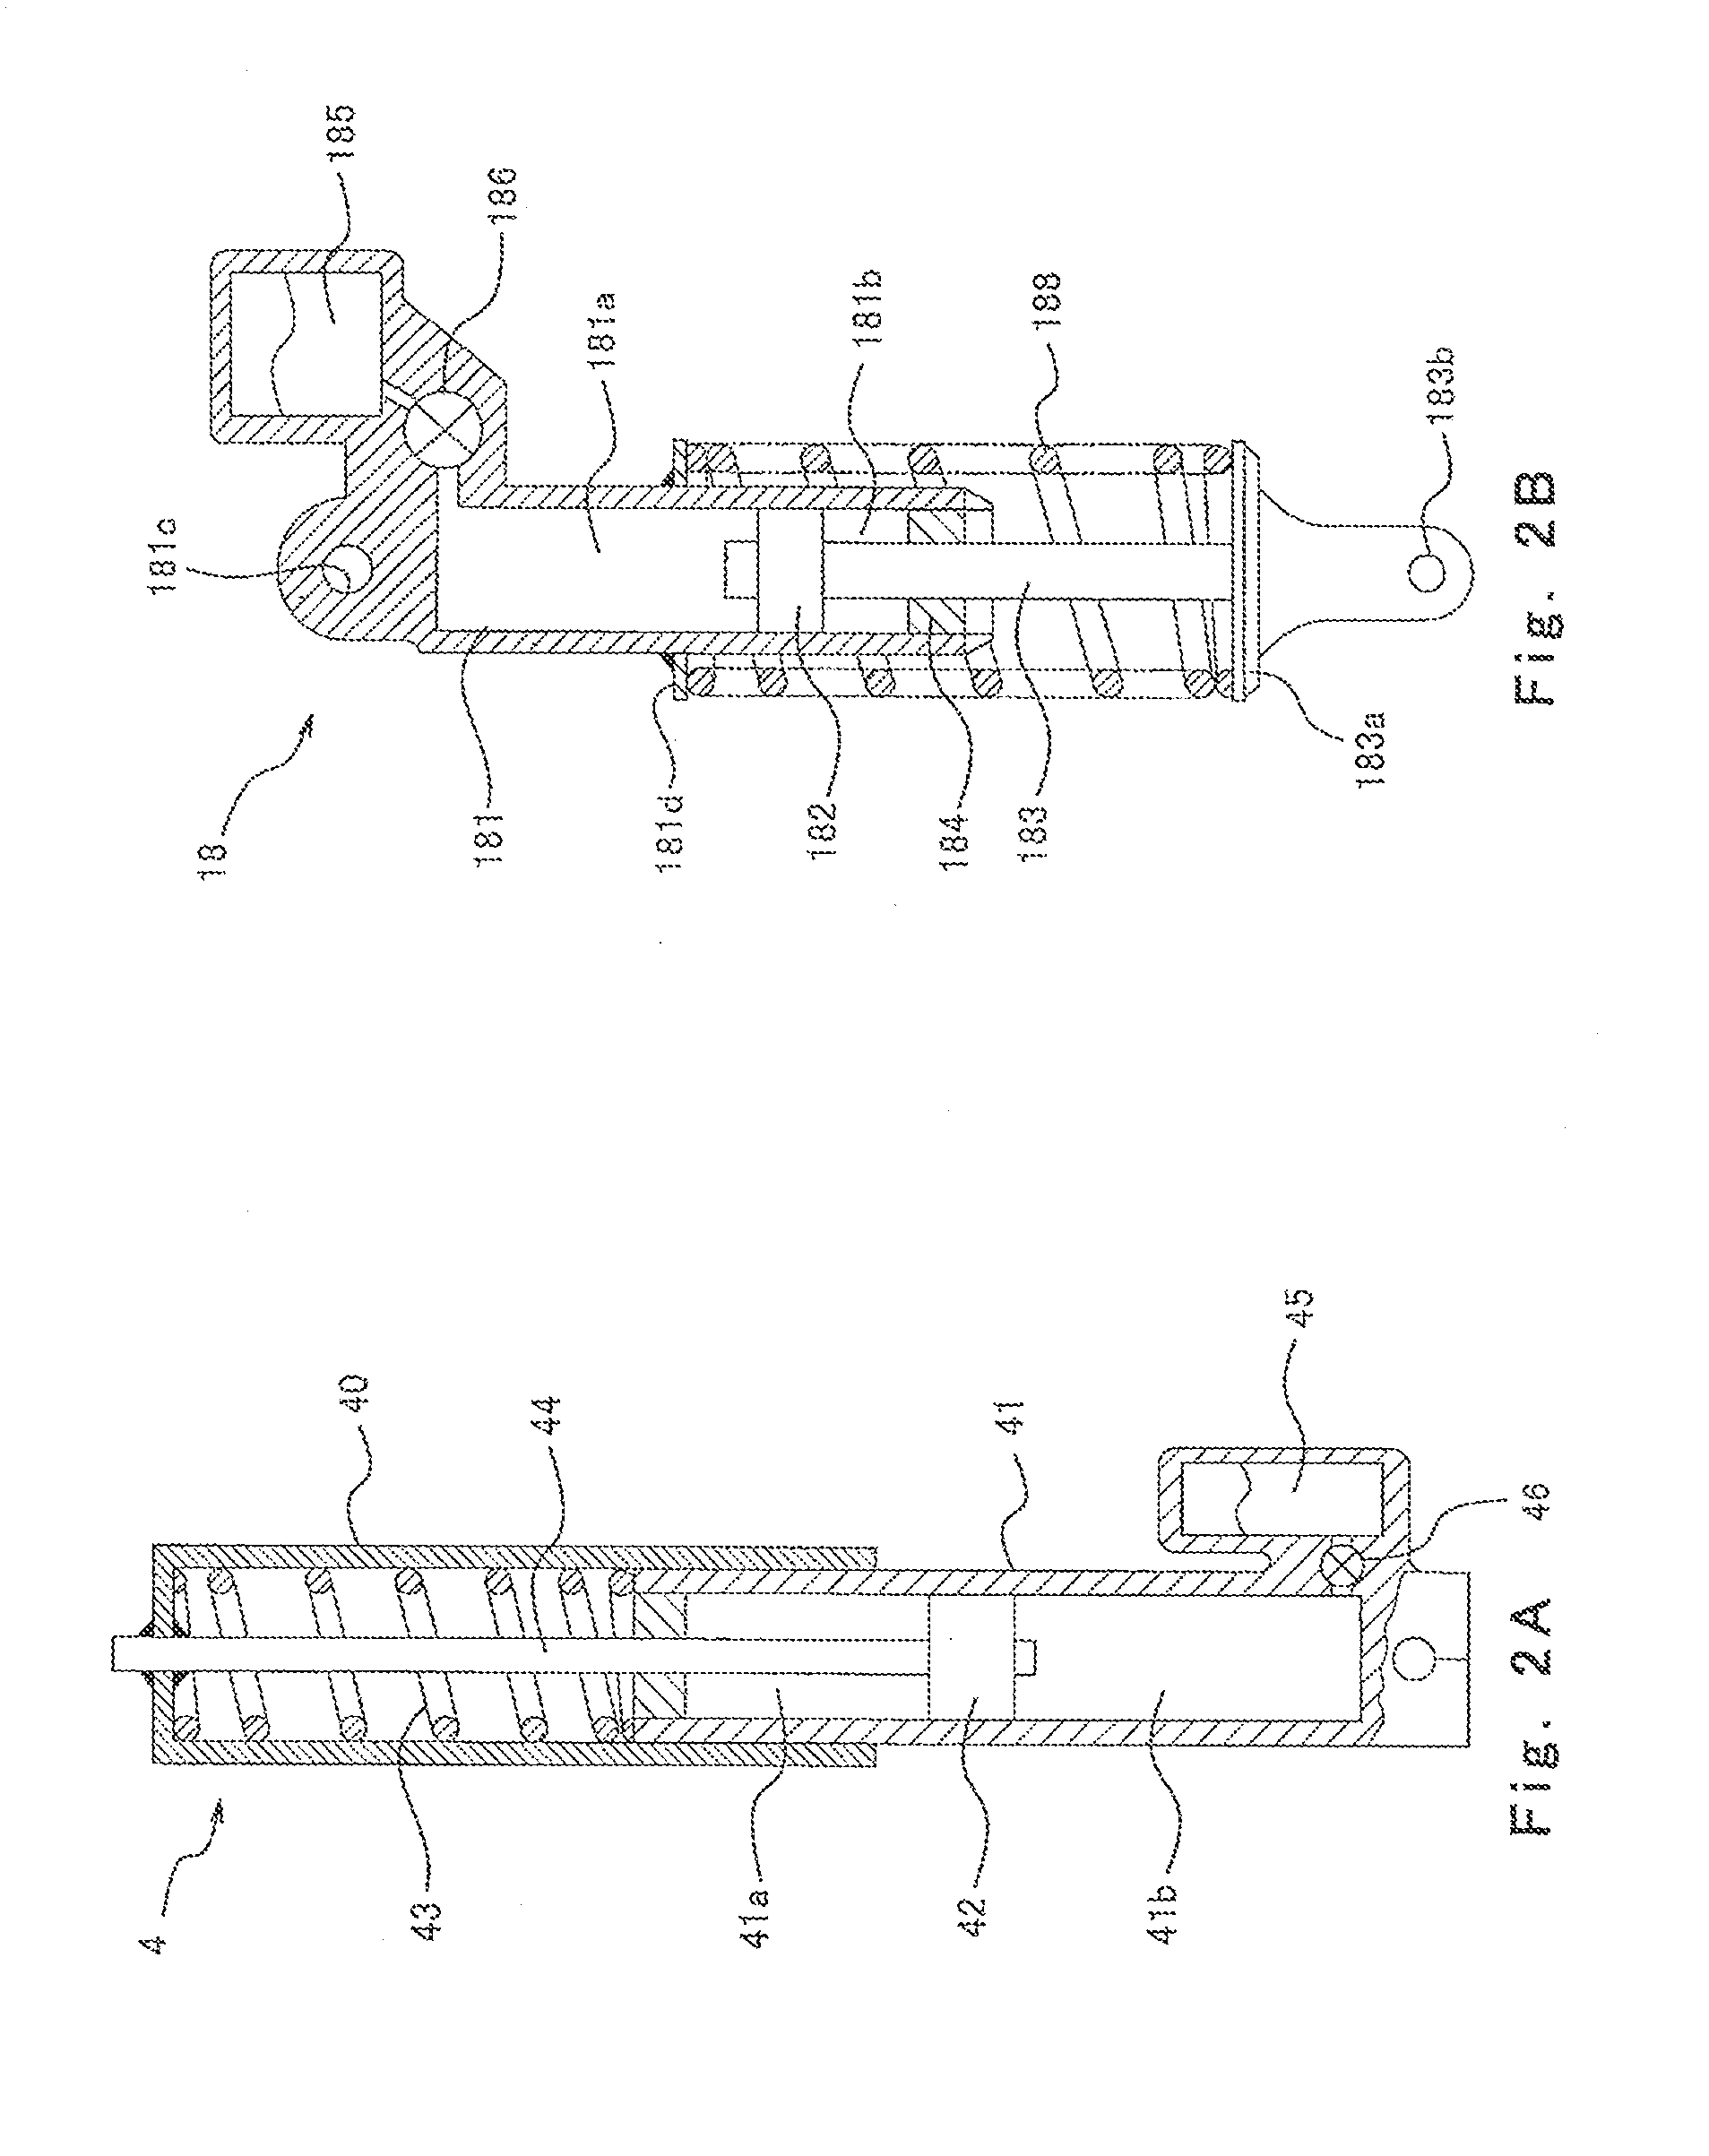 System and method for controlling straddle-type vehicle